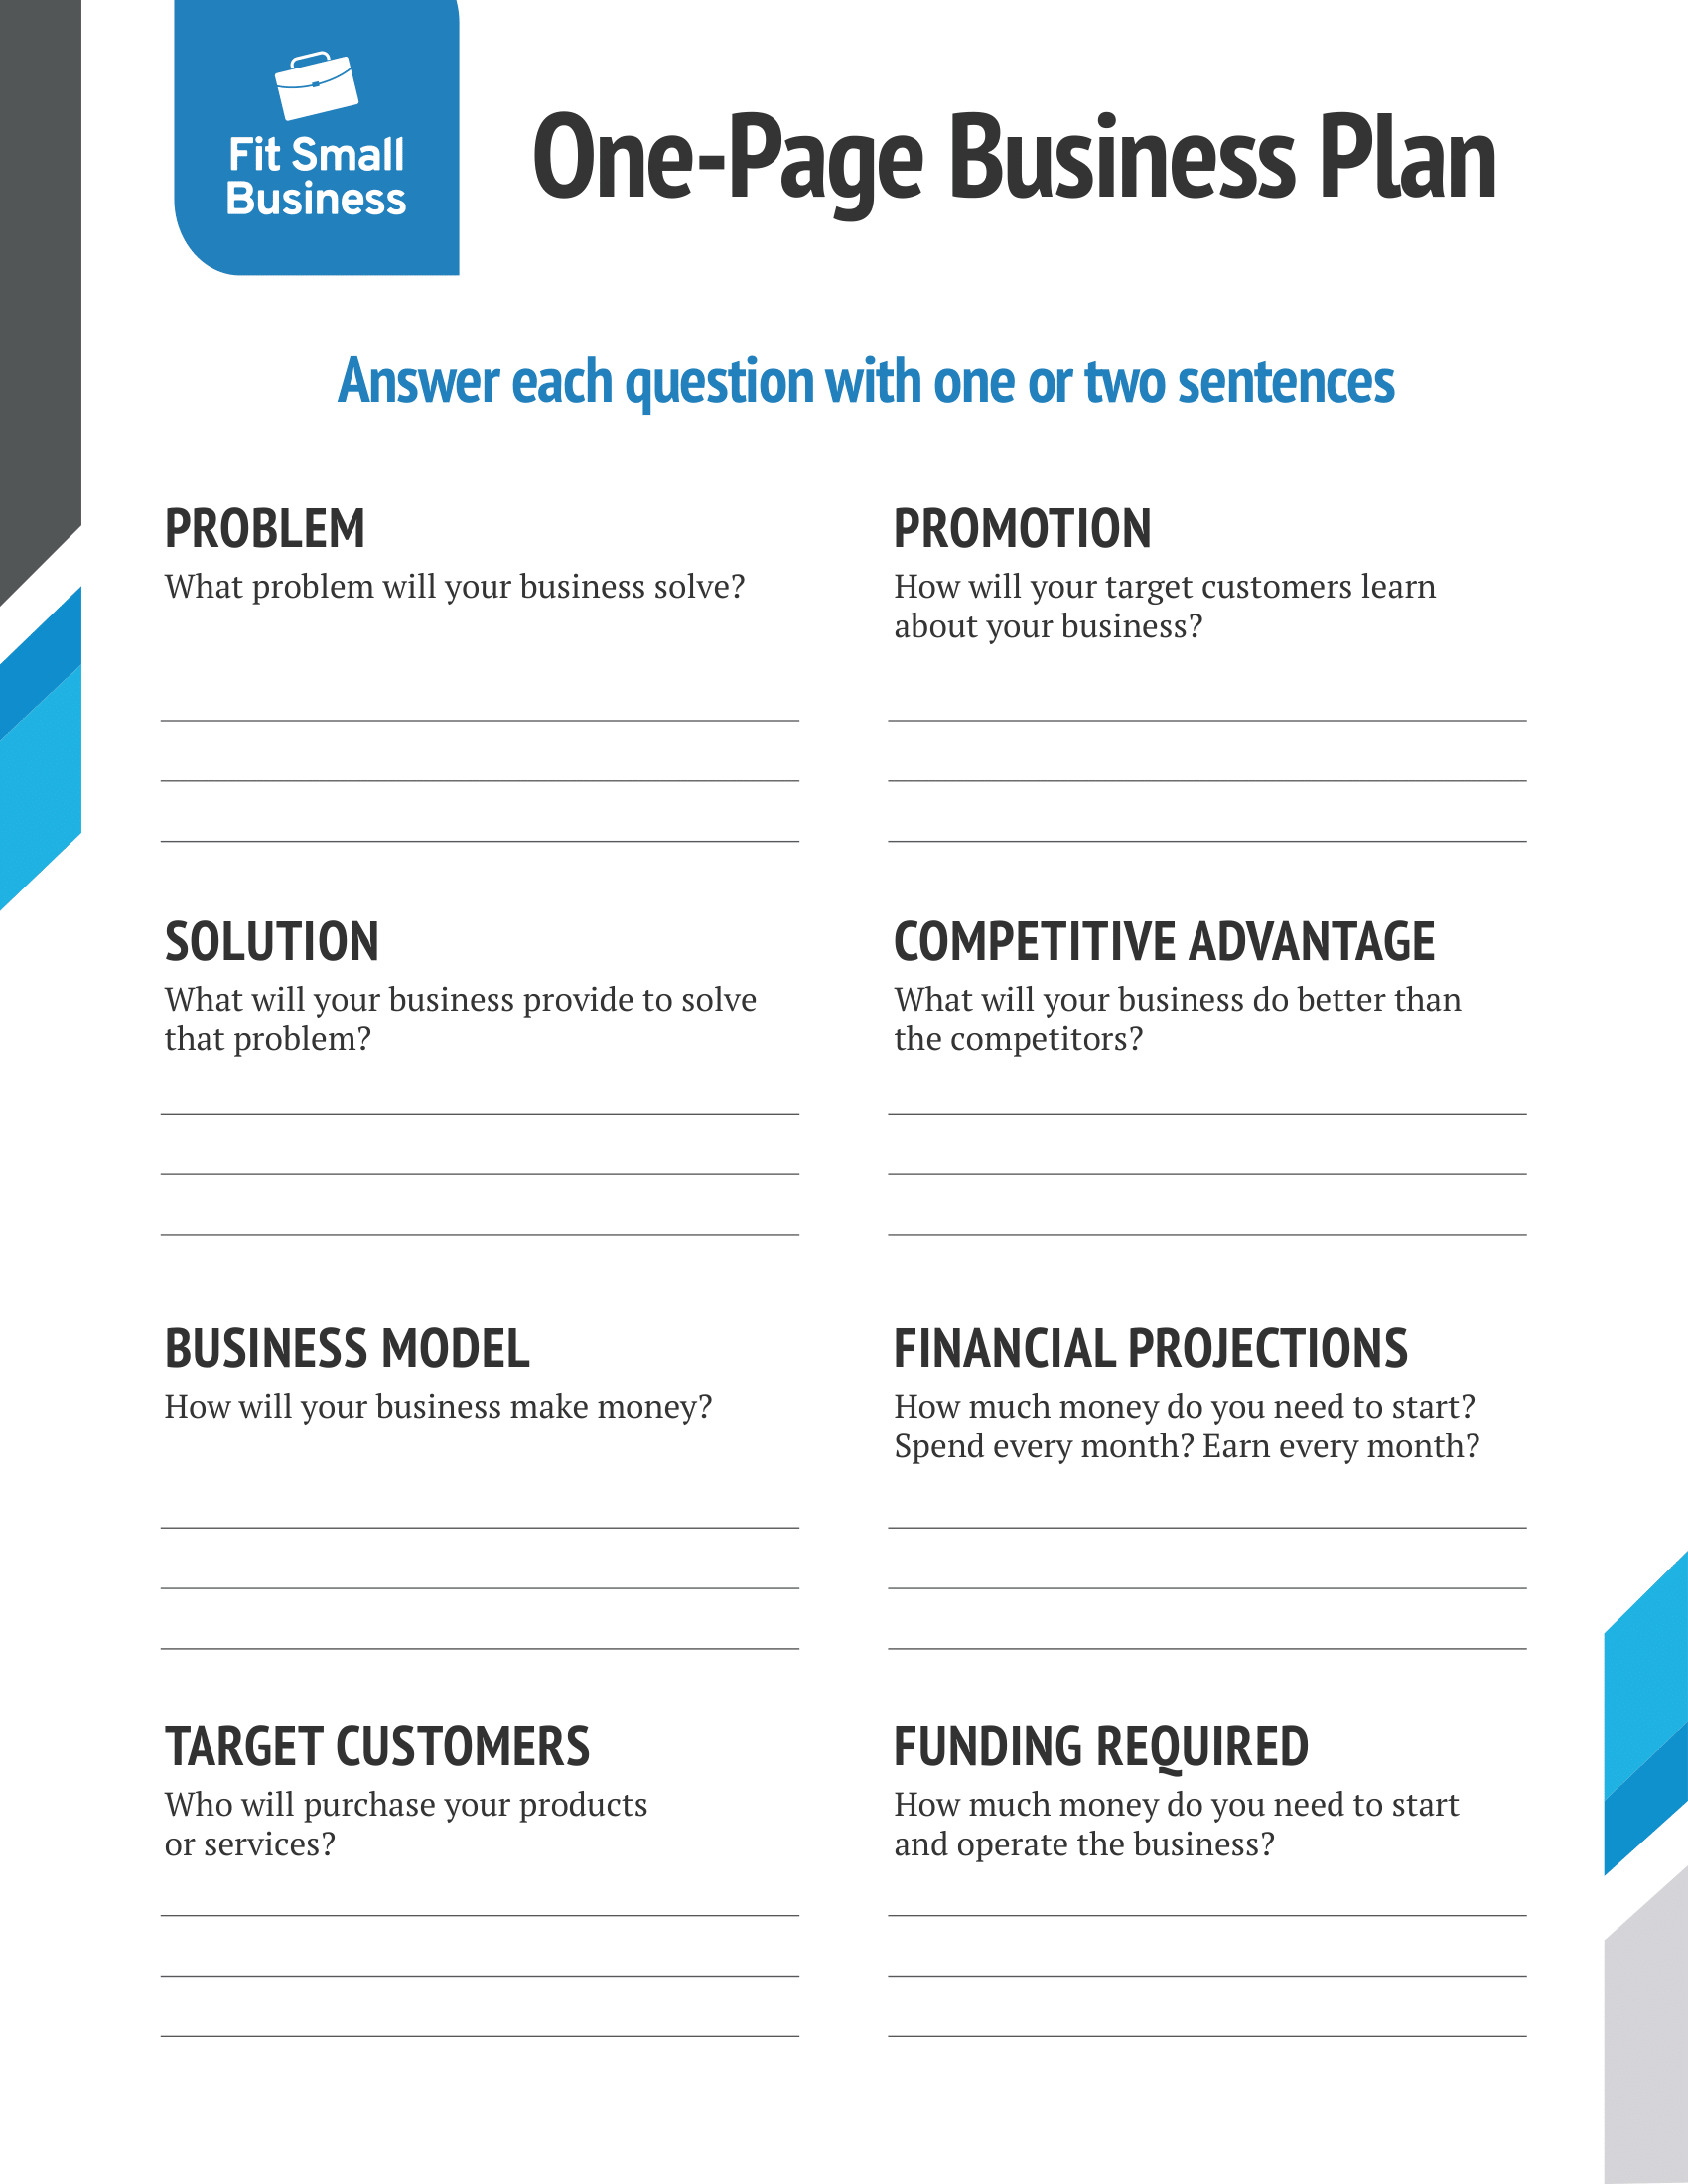 One-Page Business Plan